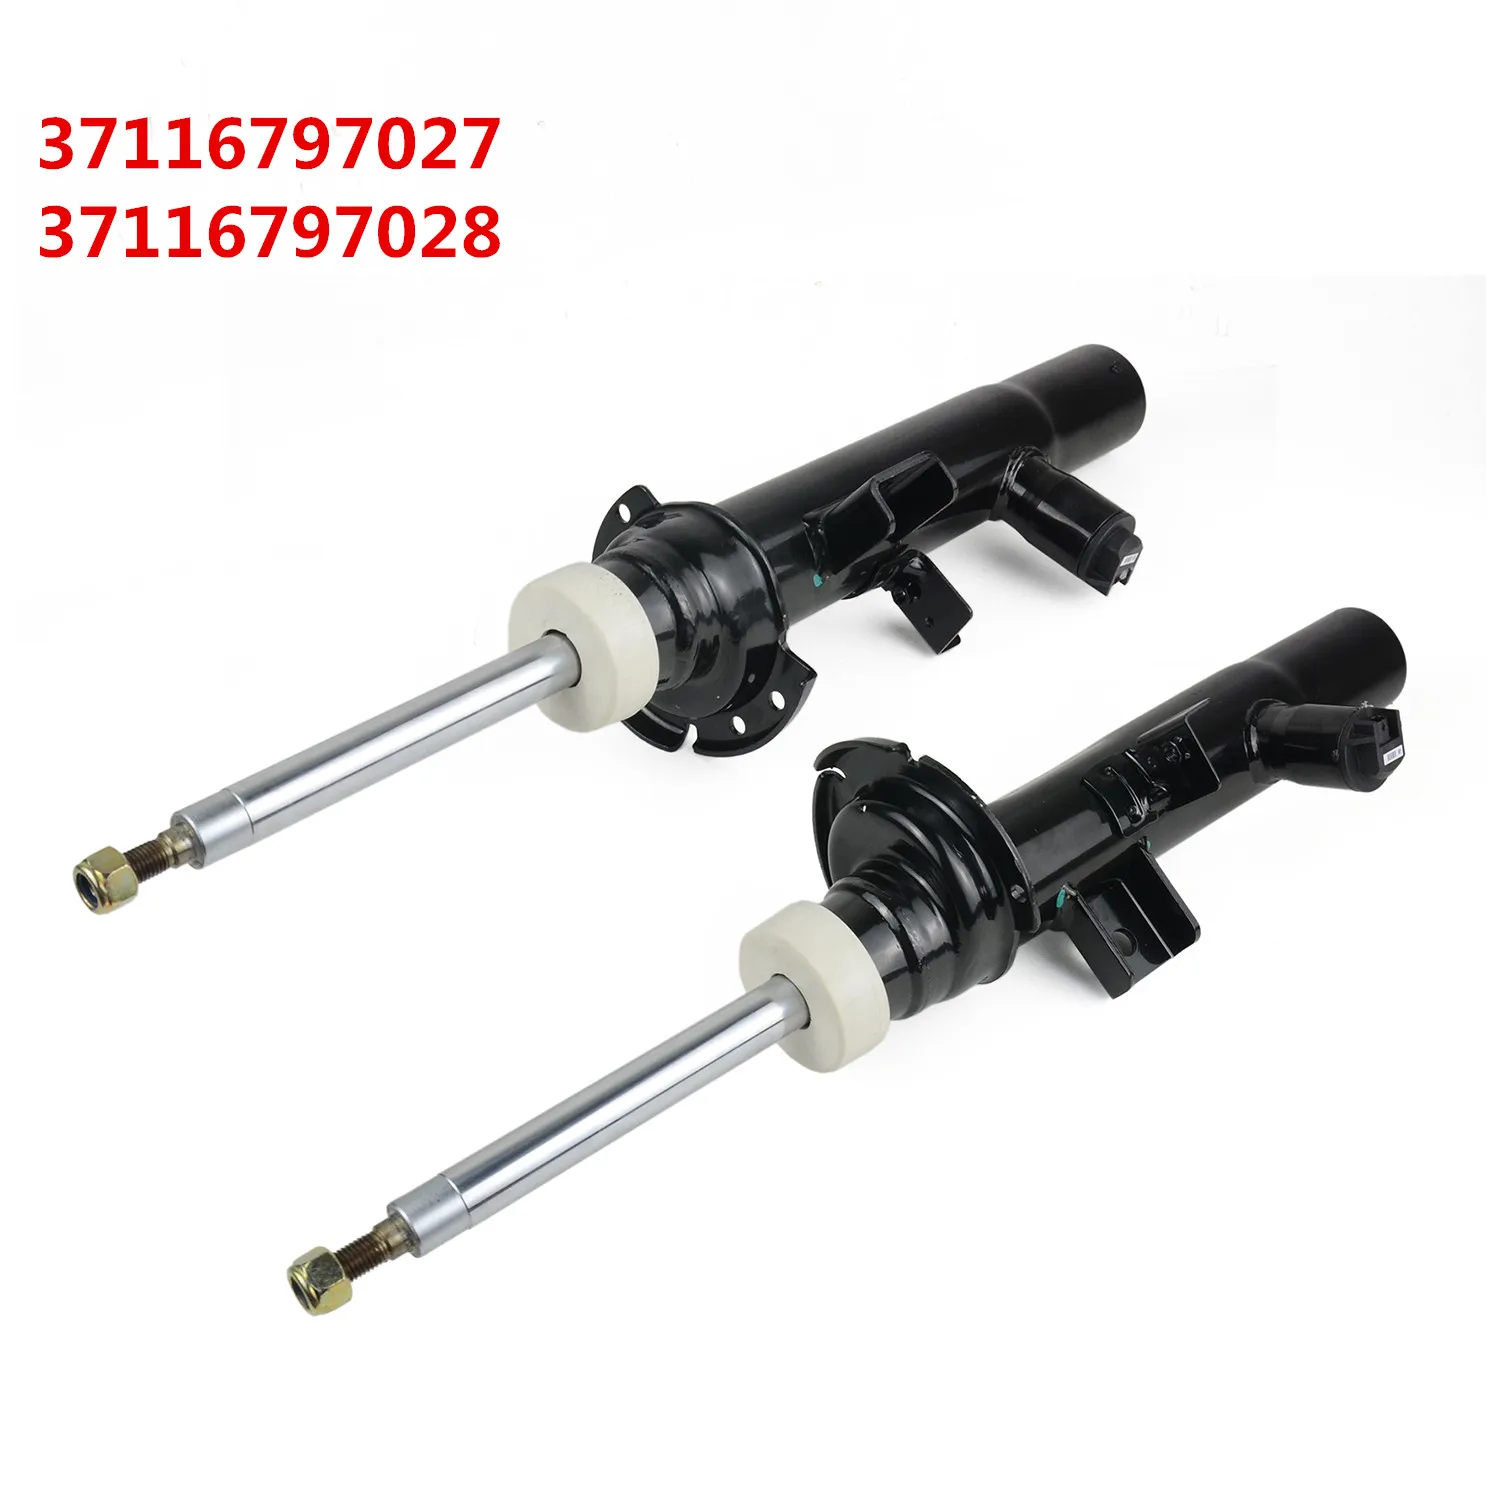 AP03 2PCS FOR BMW X3 F25 X4 F26 35i 37116797027, 37116797028  Front Left +Right Shock Absorber